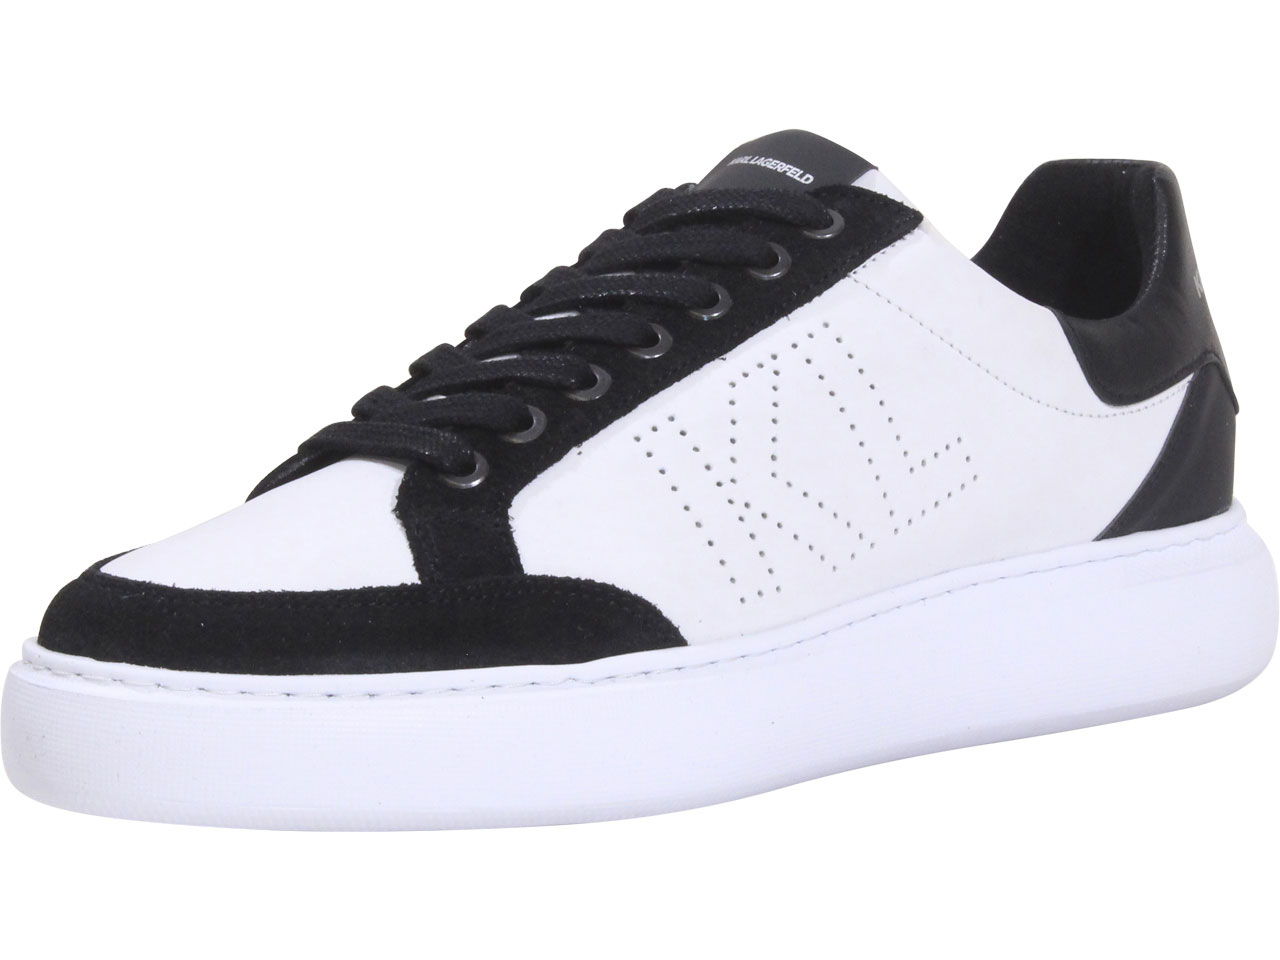 Karl Lagerfeld Paris Men's Sneakers Perforated KL Lace Up Low Top White ...